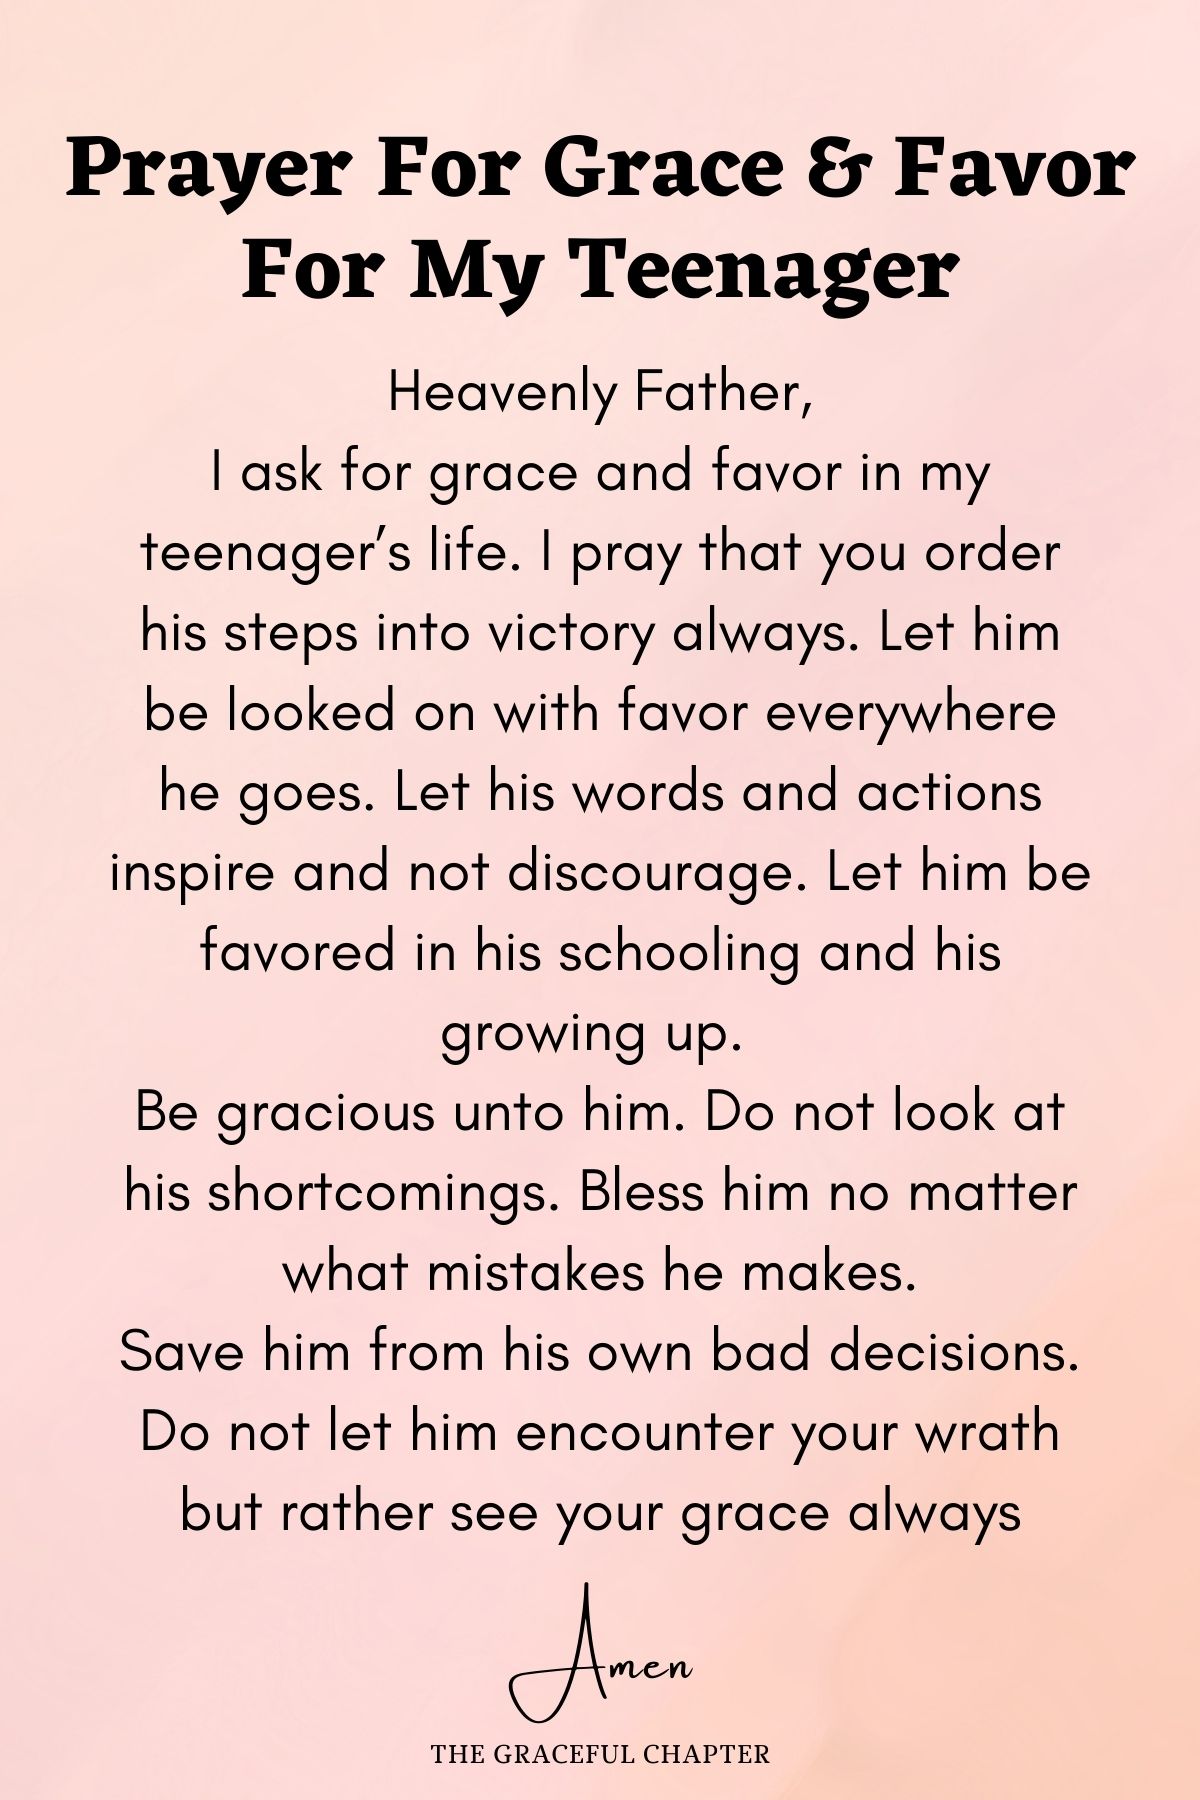 Prayer for grace and favor for my teenager